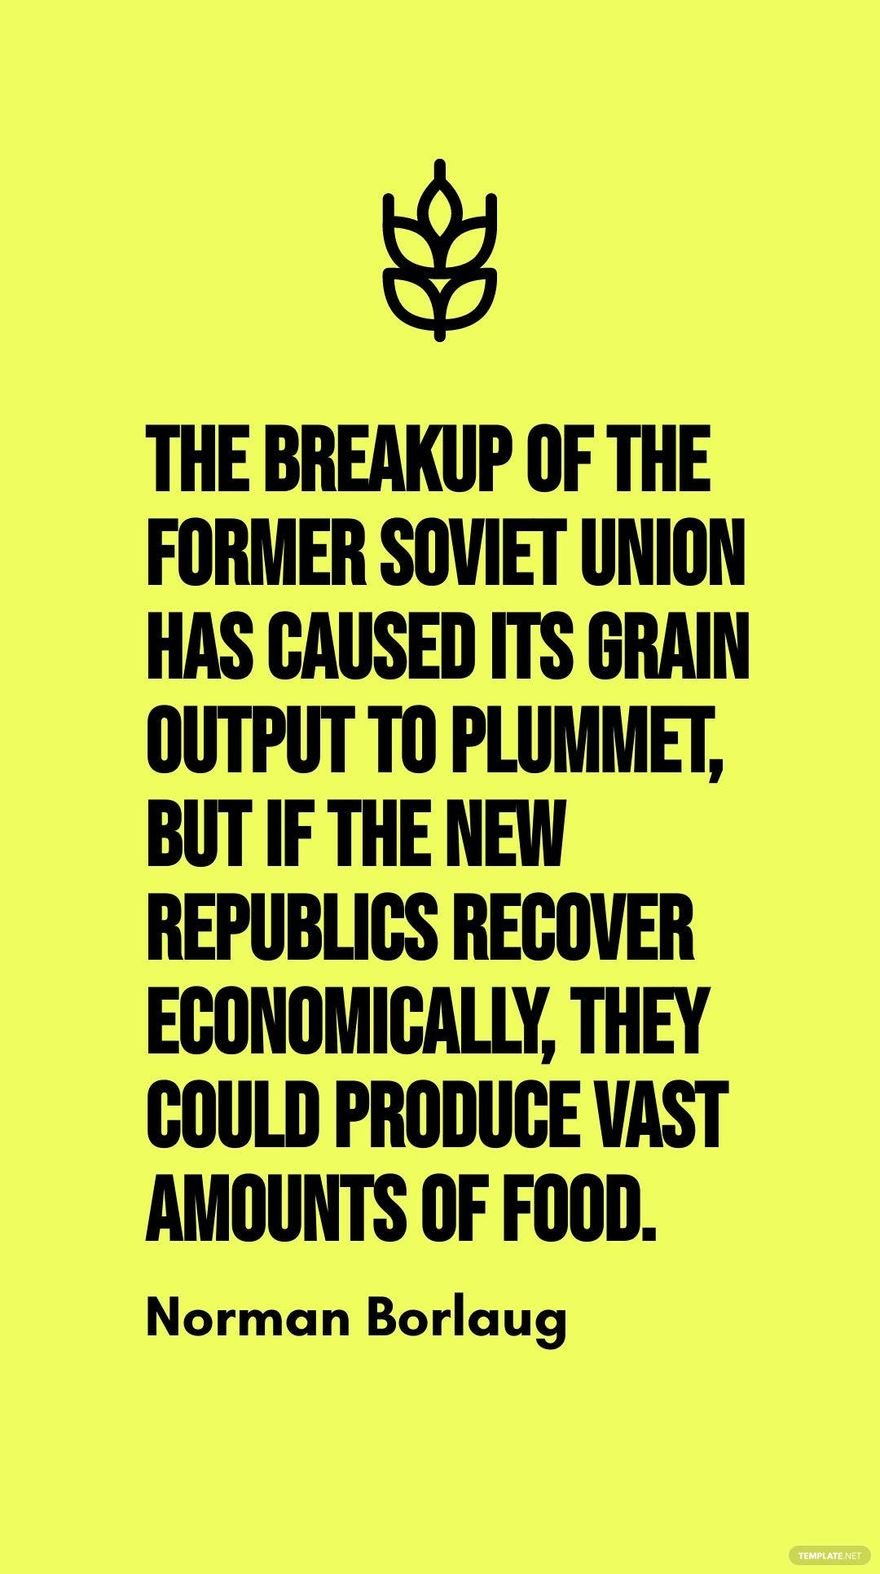 Norman Borlaug - The breakup of the former Soviet Union has caused its grain output to plummet, but if the new republics recover economically, they could produce vast amounts of food.